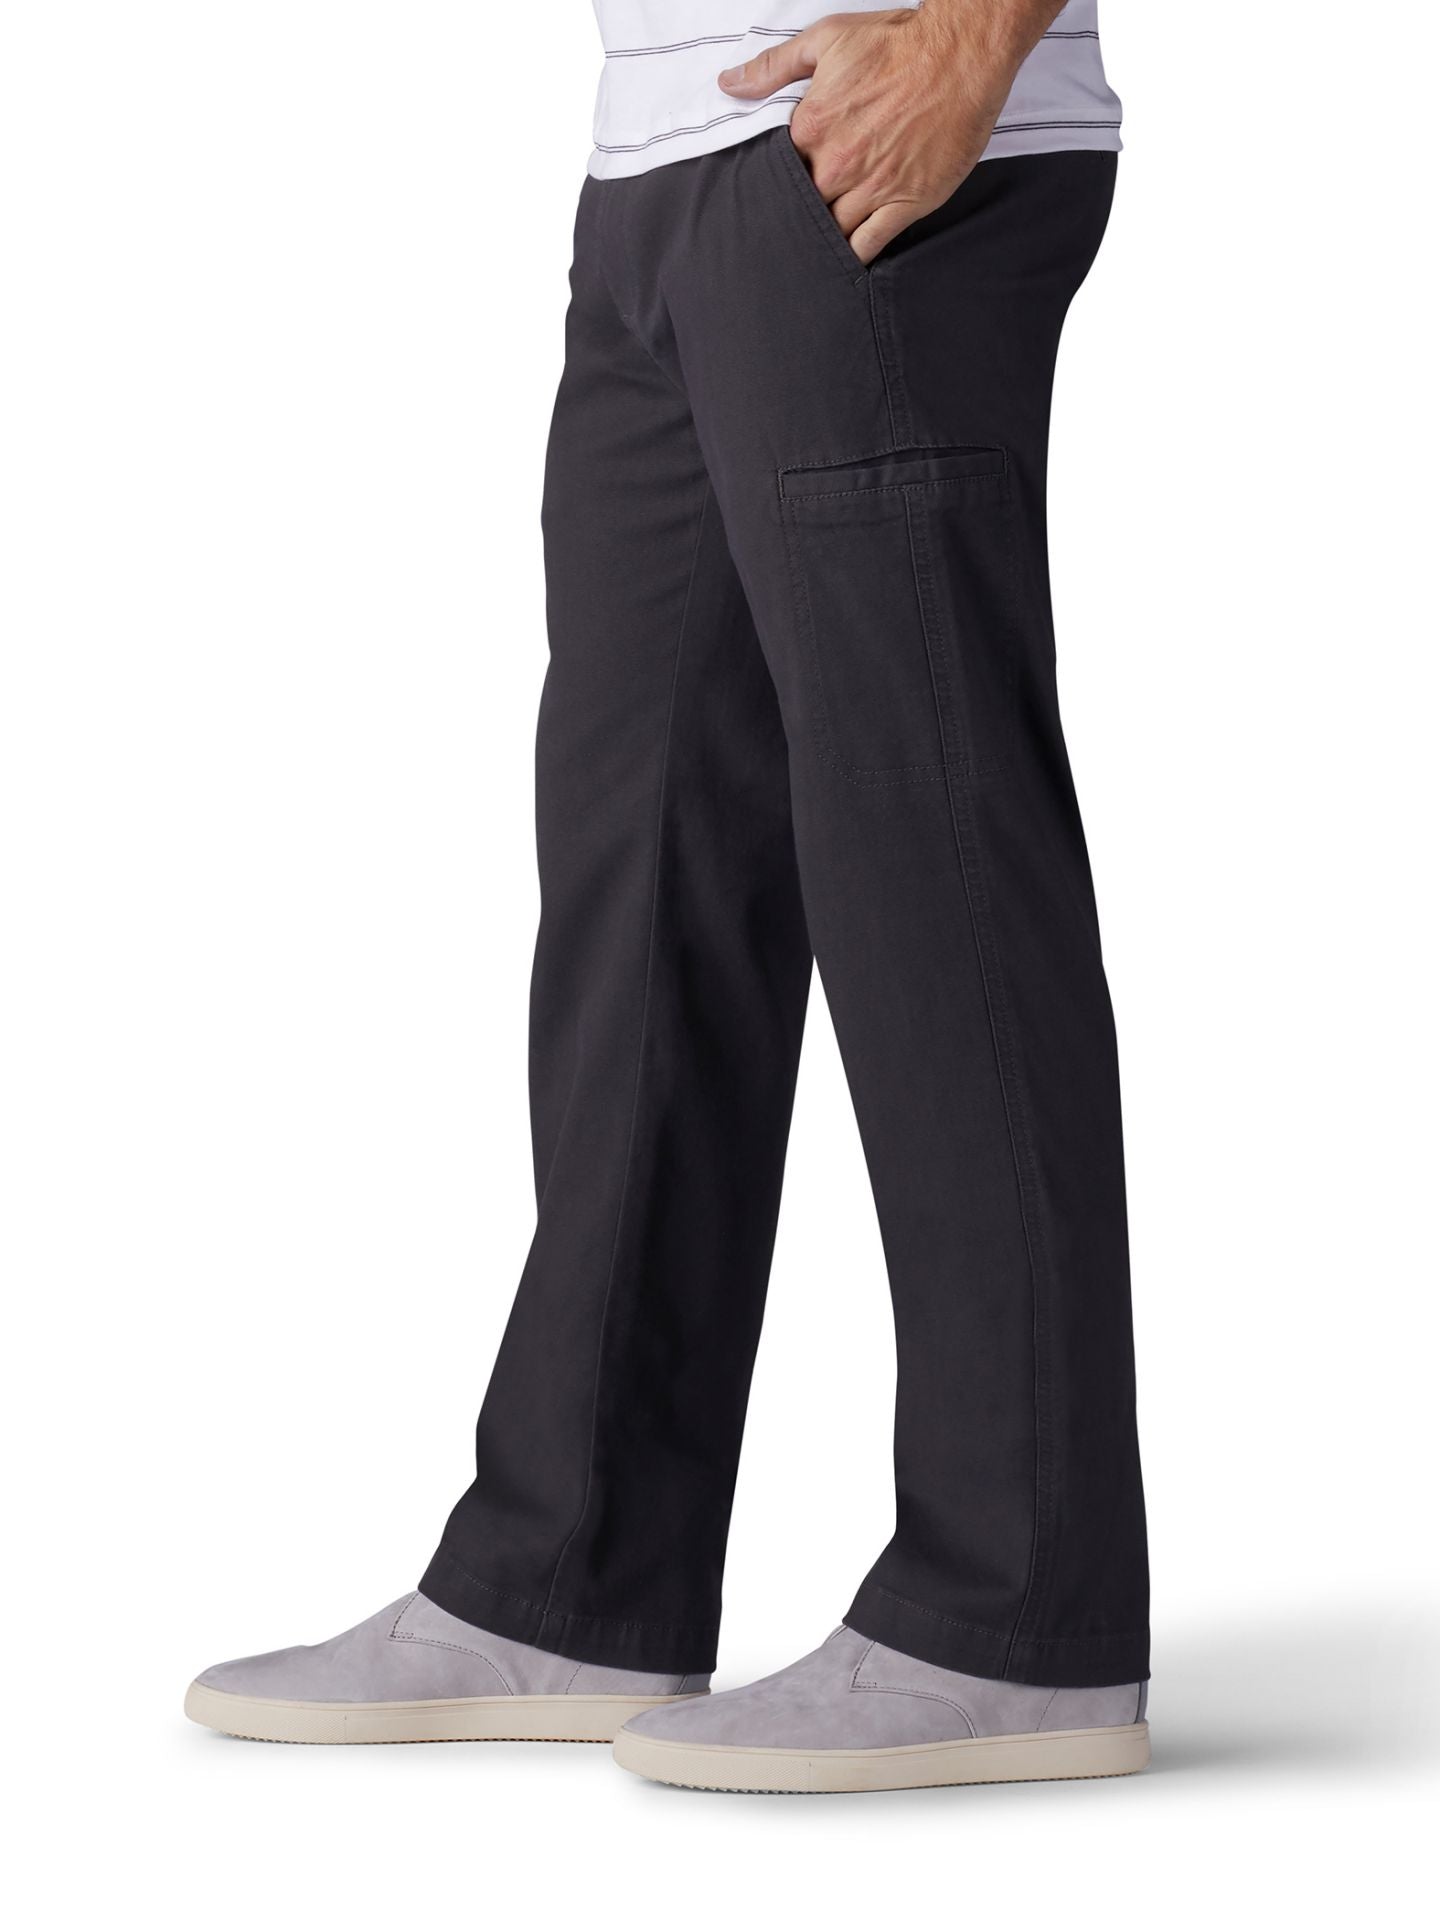 Men's Extreme Comfort Straight Fit Cargo Pant - Shadow